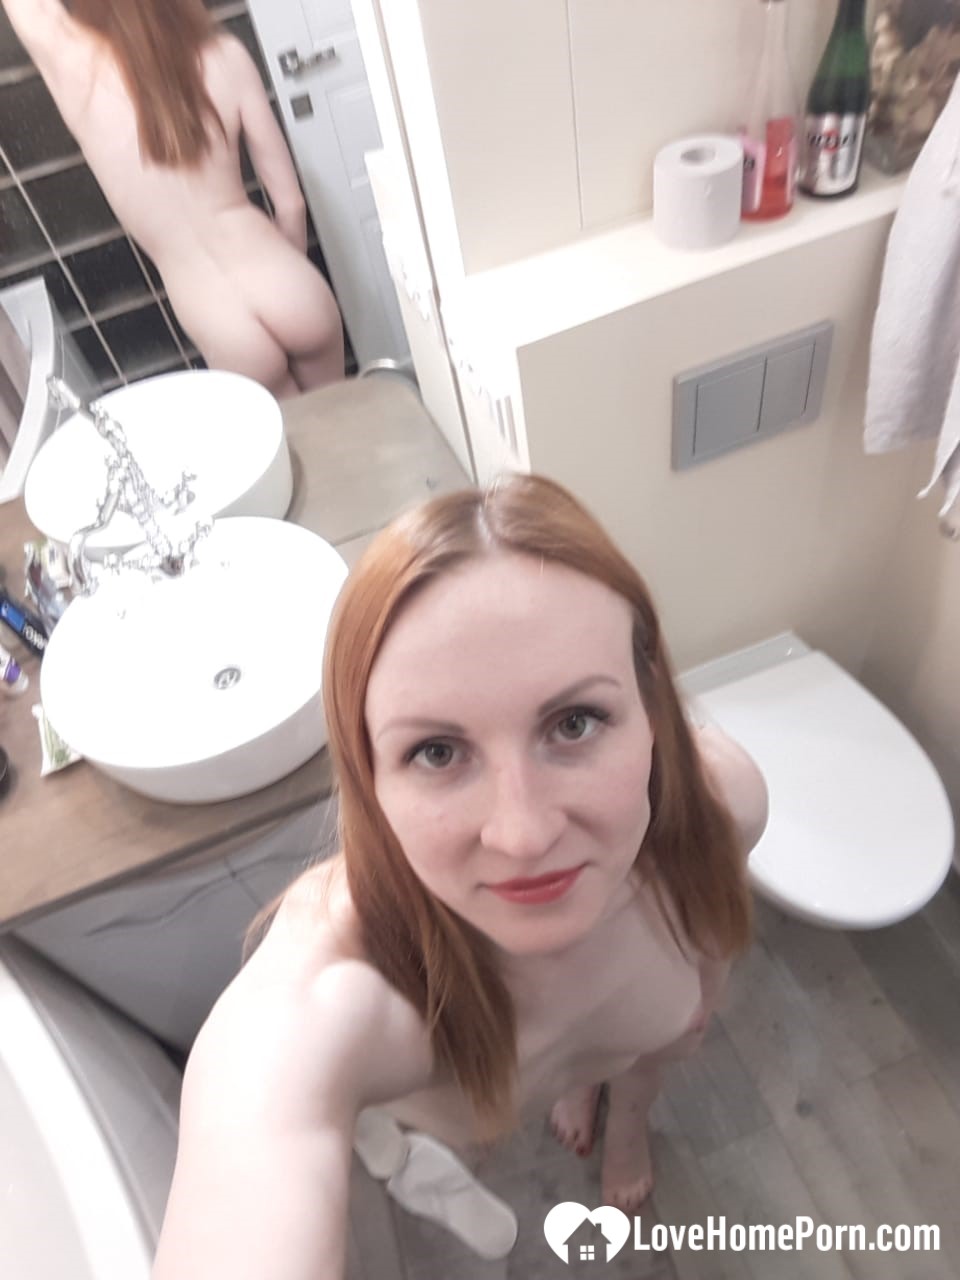 Skinny redhead with small tits in the mirror